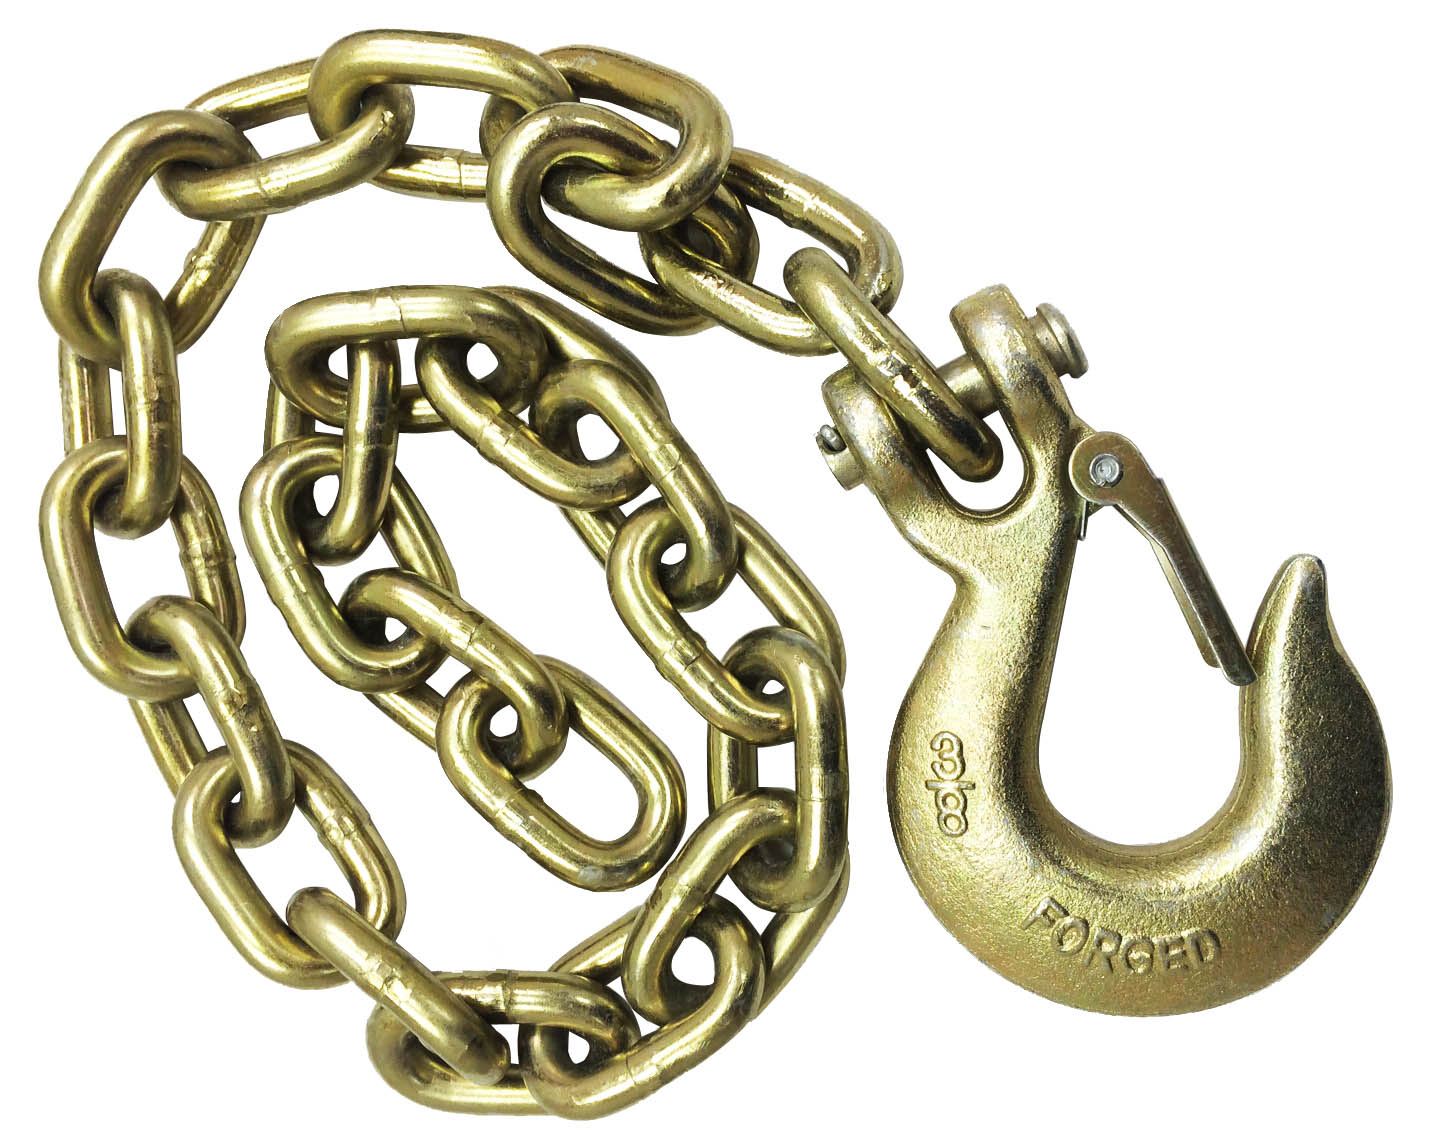 TOWKING 2 New 3/8 x 35 Grade 70 Trailer Safety Chains with Forged Hooks & Safety Clips -25004